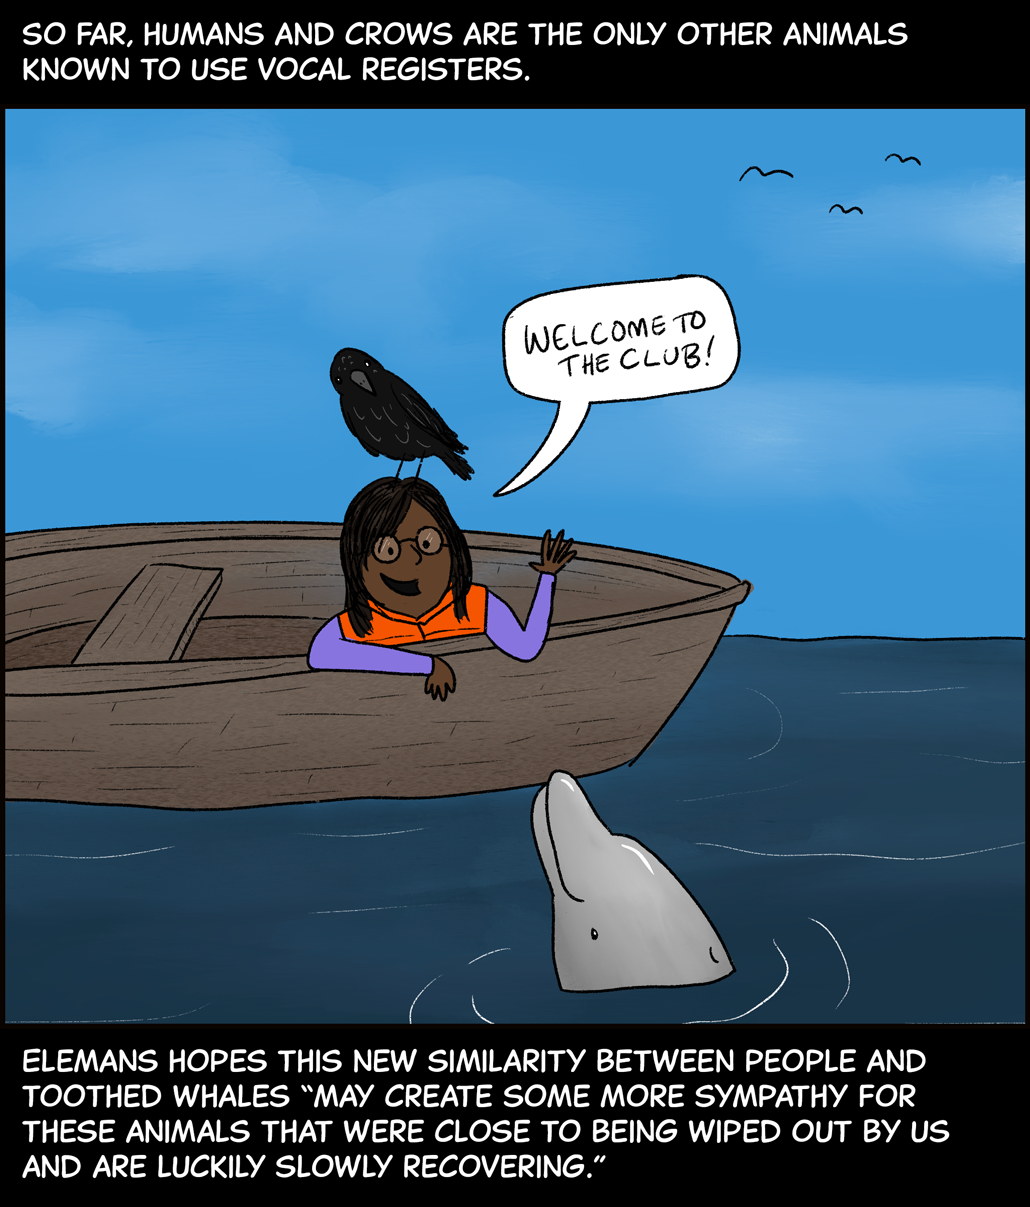 Text (above image): So far, humans and crows are the only other animals known to use vocal registers. Image: a person in a canoe wearing a life vest and glasses has a crow perched on their shoulder and waves at a dolphin poking its head out of the water. The person says to the dolphin, “Welcome to the club!” Text (below image): Elemans hopes this new similarity between people and toothed whales “may create some more sympathy for these animals that were close to being wiped out by us and are luckily slowly recovering.”